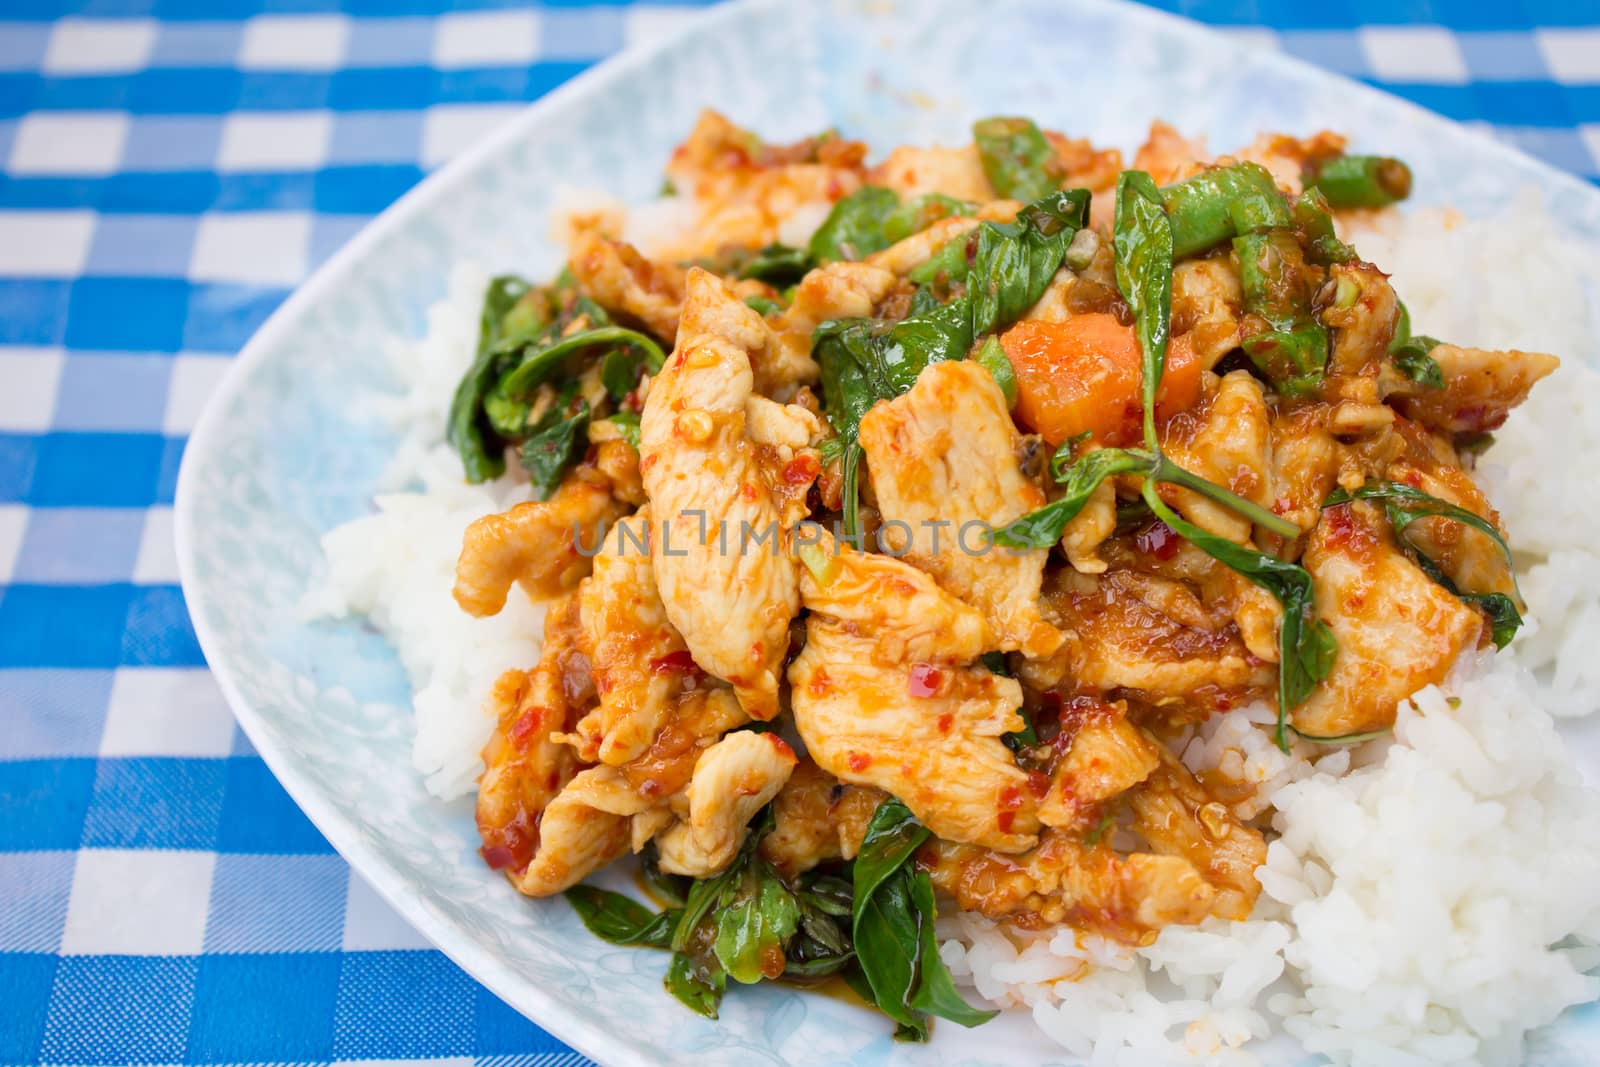 Stir fried chicken in holy basil and steamed rice